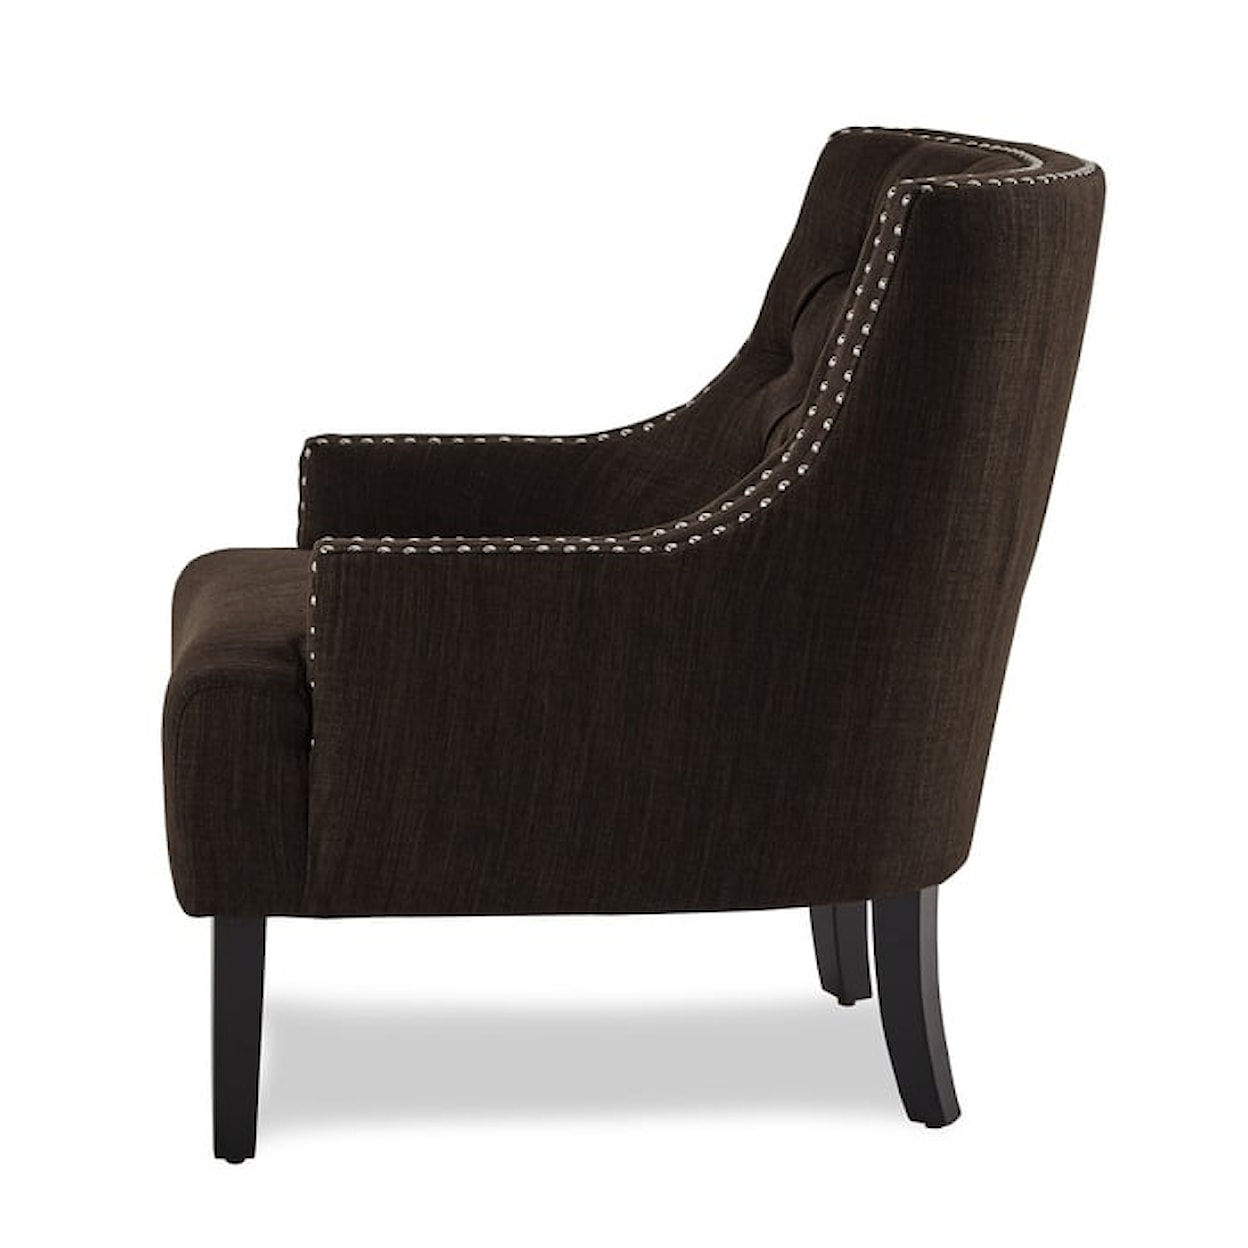 Homelegance Charisma Accent Chair